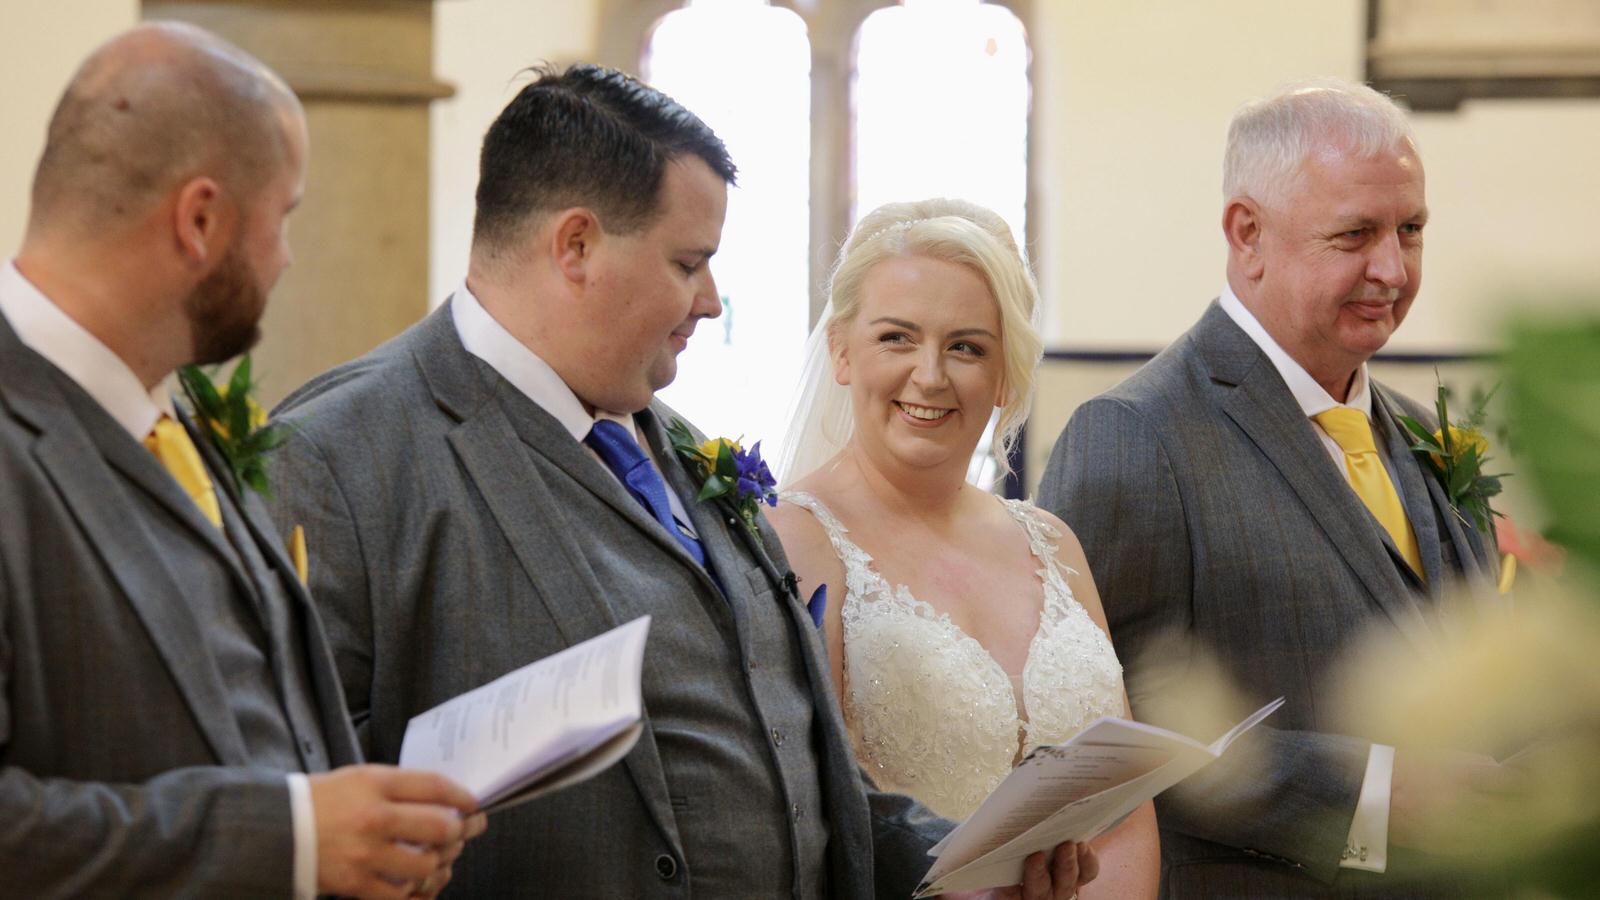 couple smile at each other during wedding service